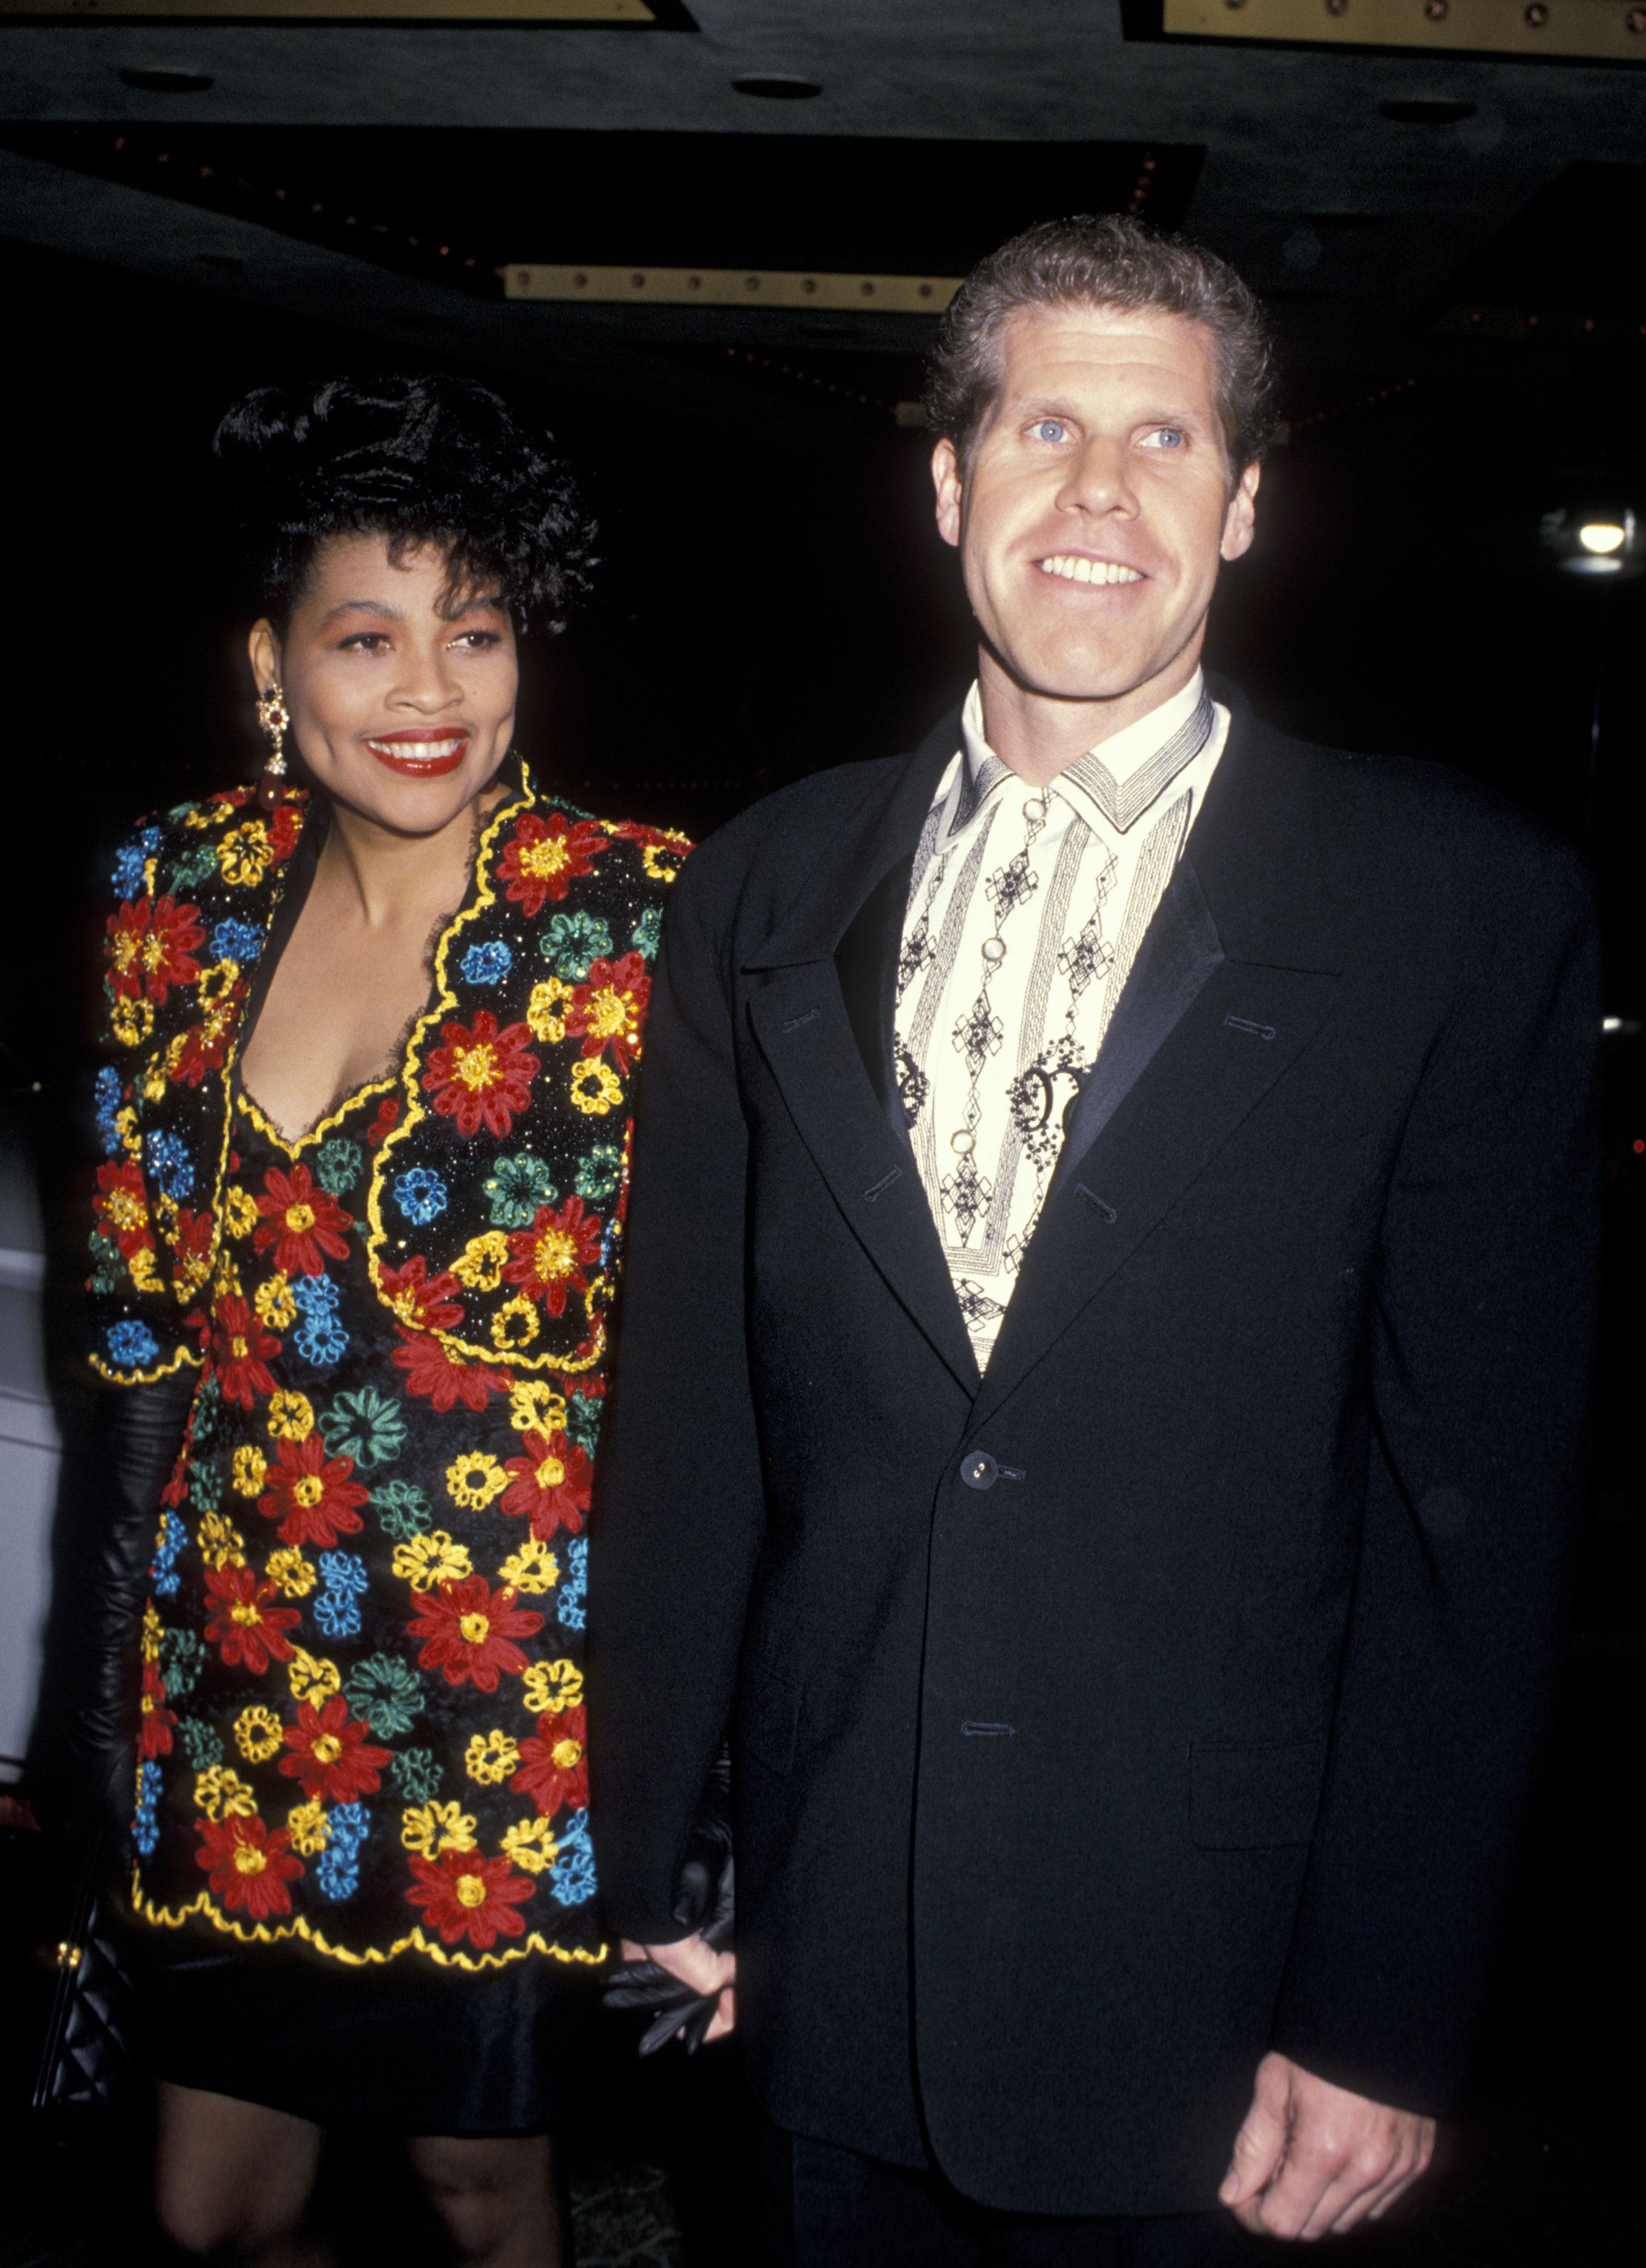 Opal Stone and Ron Perlman at the 46th Annual Golden Globe Awards on January 28, 1989, in Beverly Hills, California. | Source: Getty Images